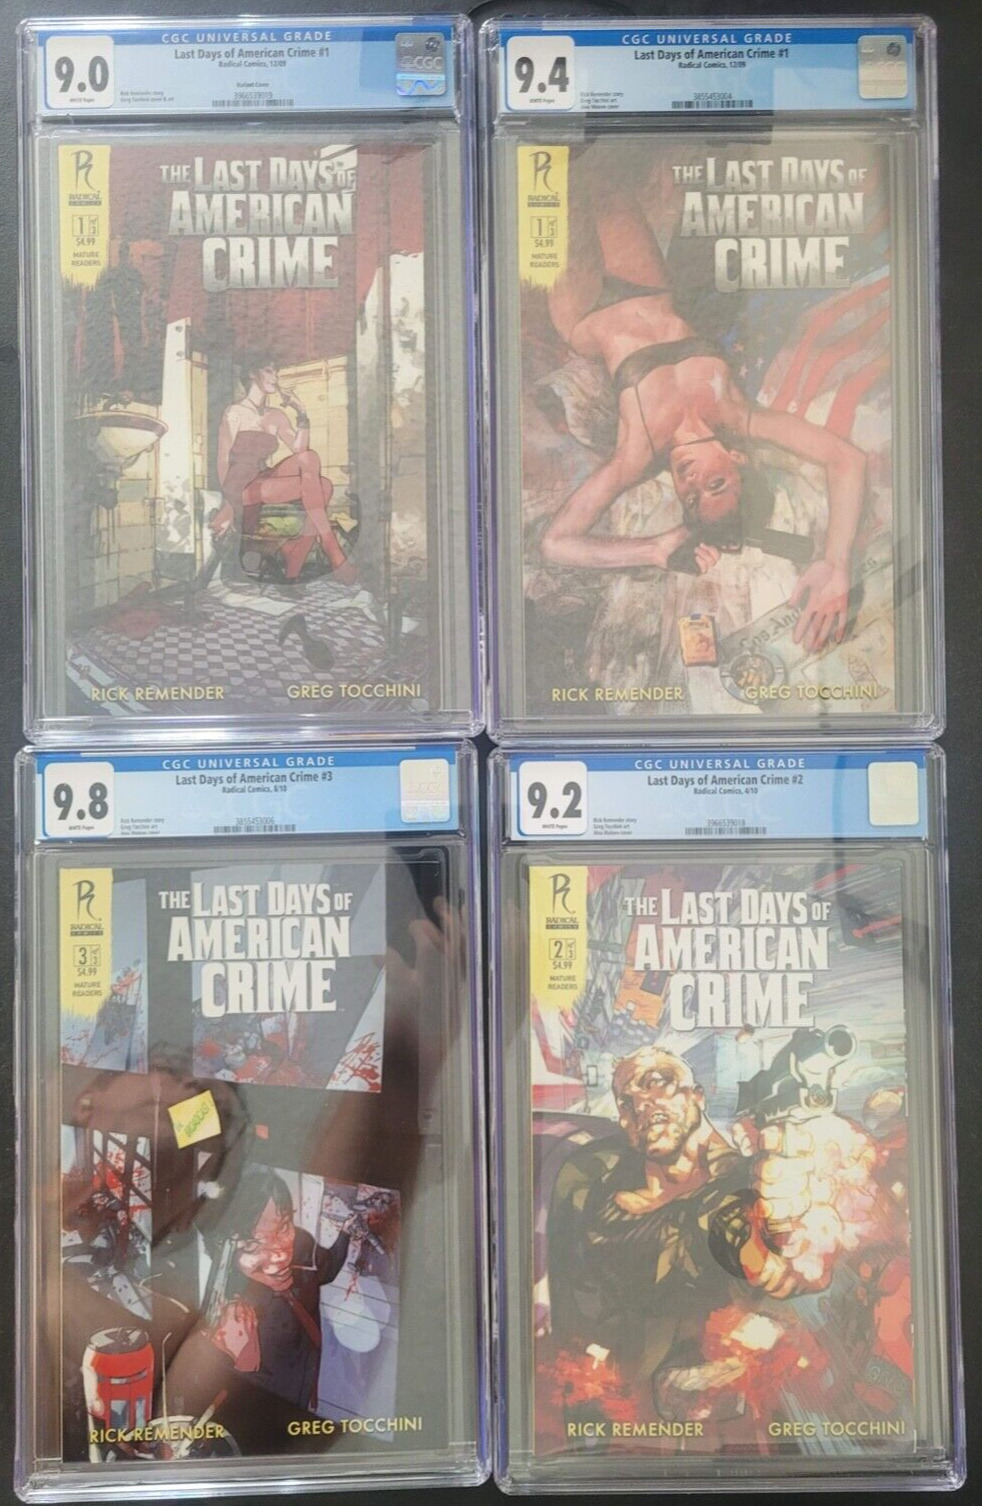 LAST DAYS OF AMERICAN CRIME #1-3 FULL SERIES ALL CGC GRADED TOCCHINI+VARIANT